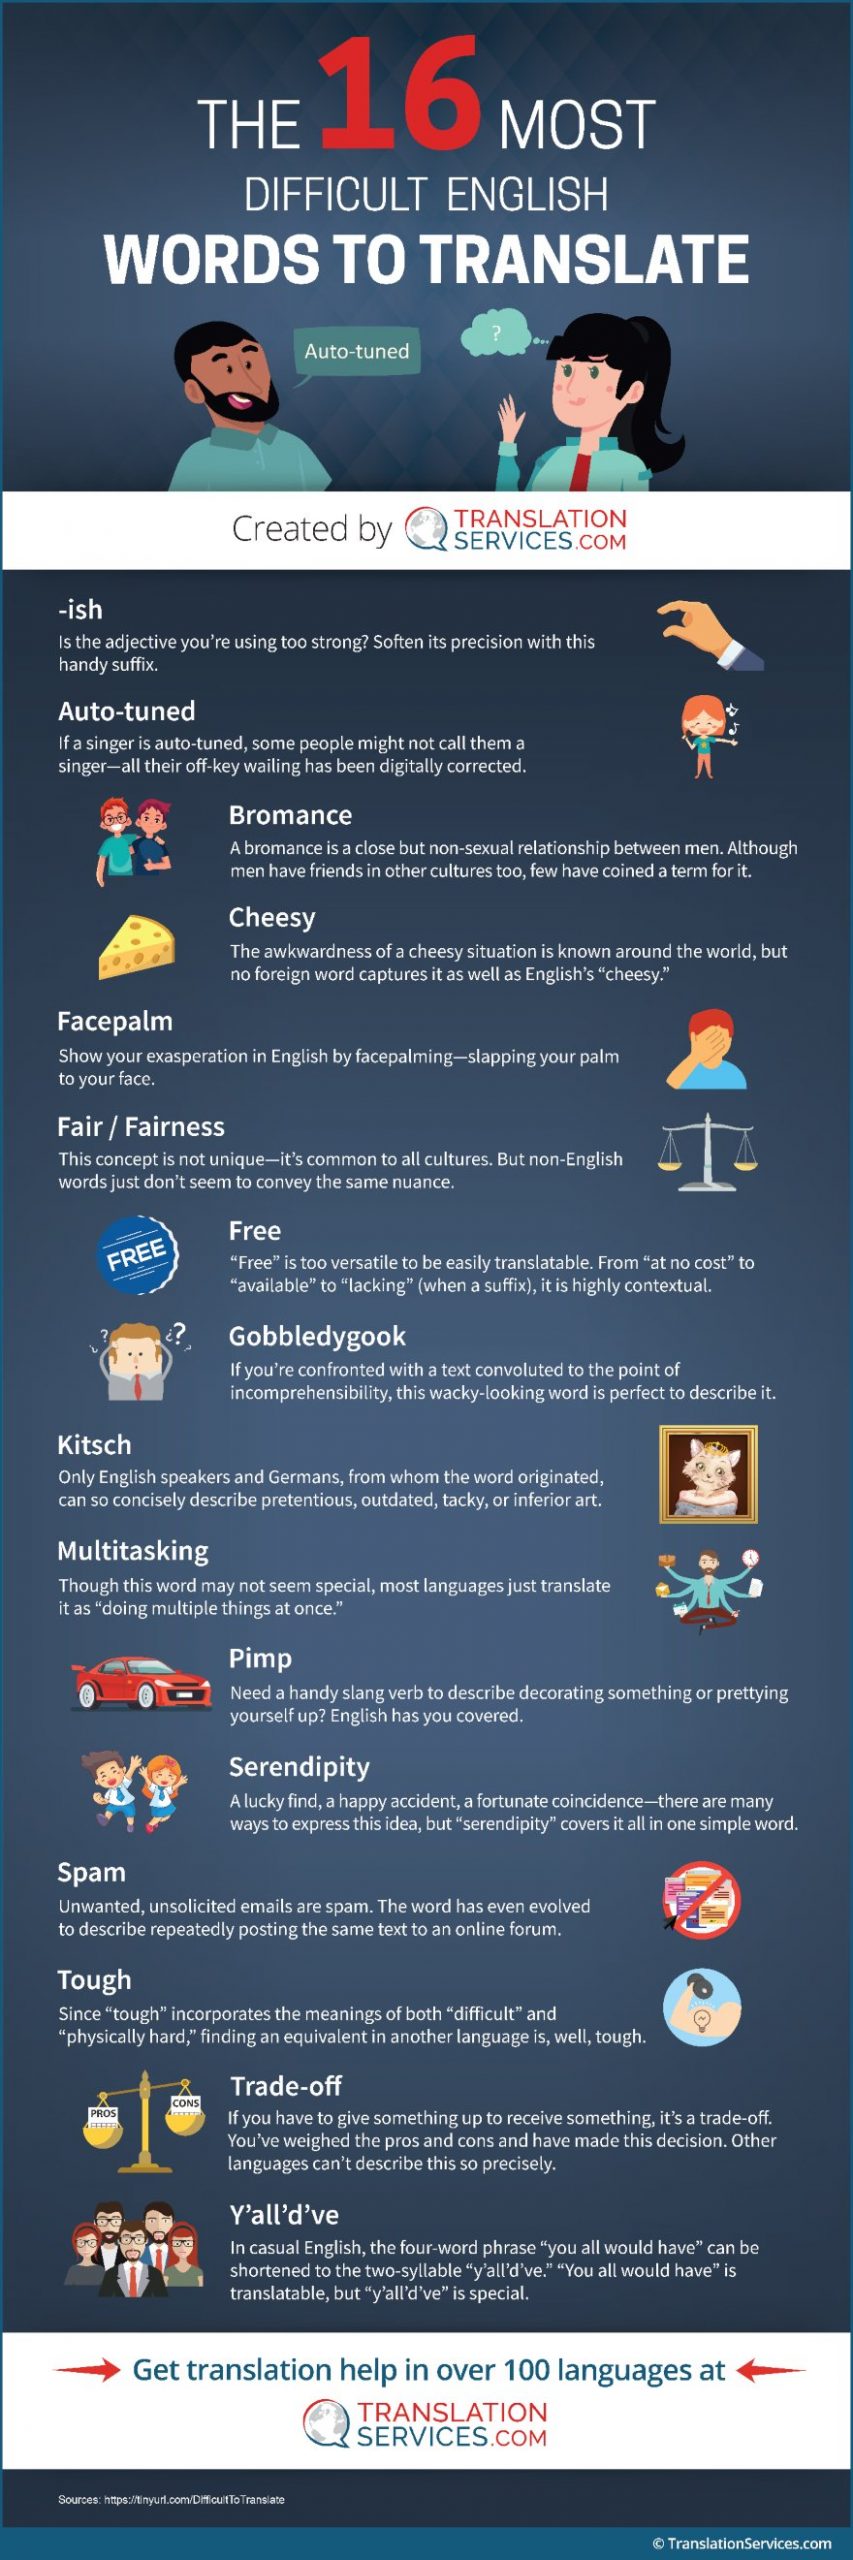 16 Most Difficult English Words to Translate